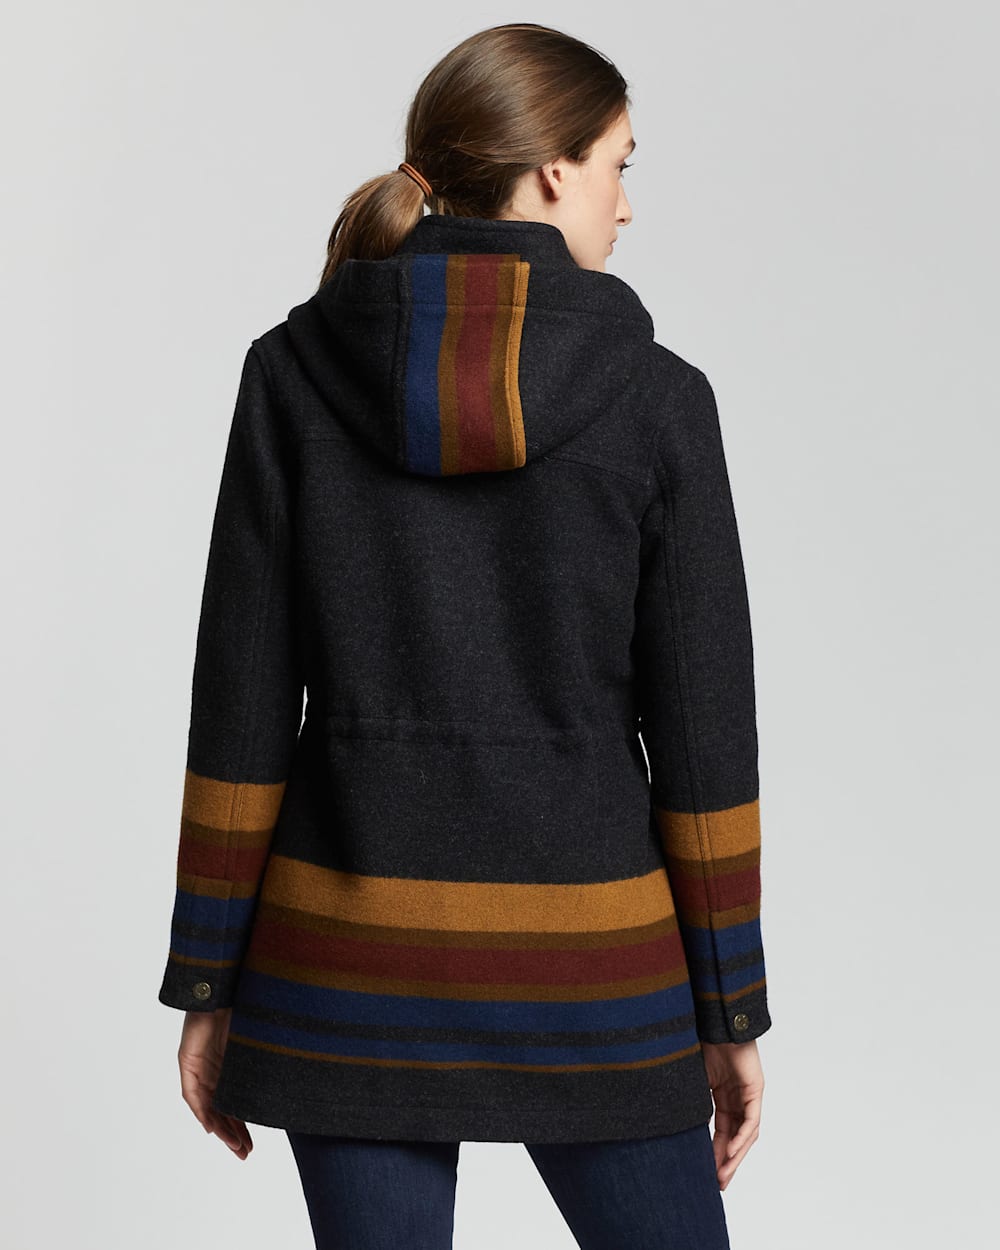 ALTERNATE VIEW OF WOMEN'S YAKIMA STRIPE WOOL PARKA IN CHARCOAL image number 3